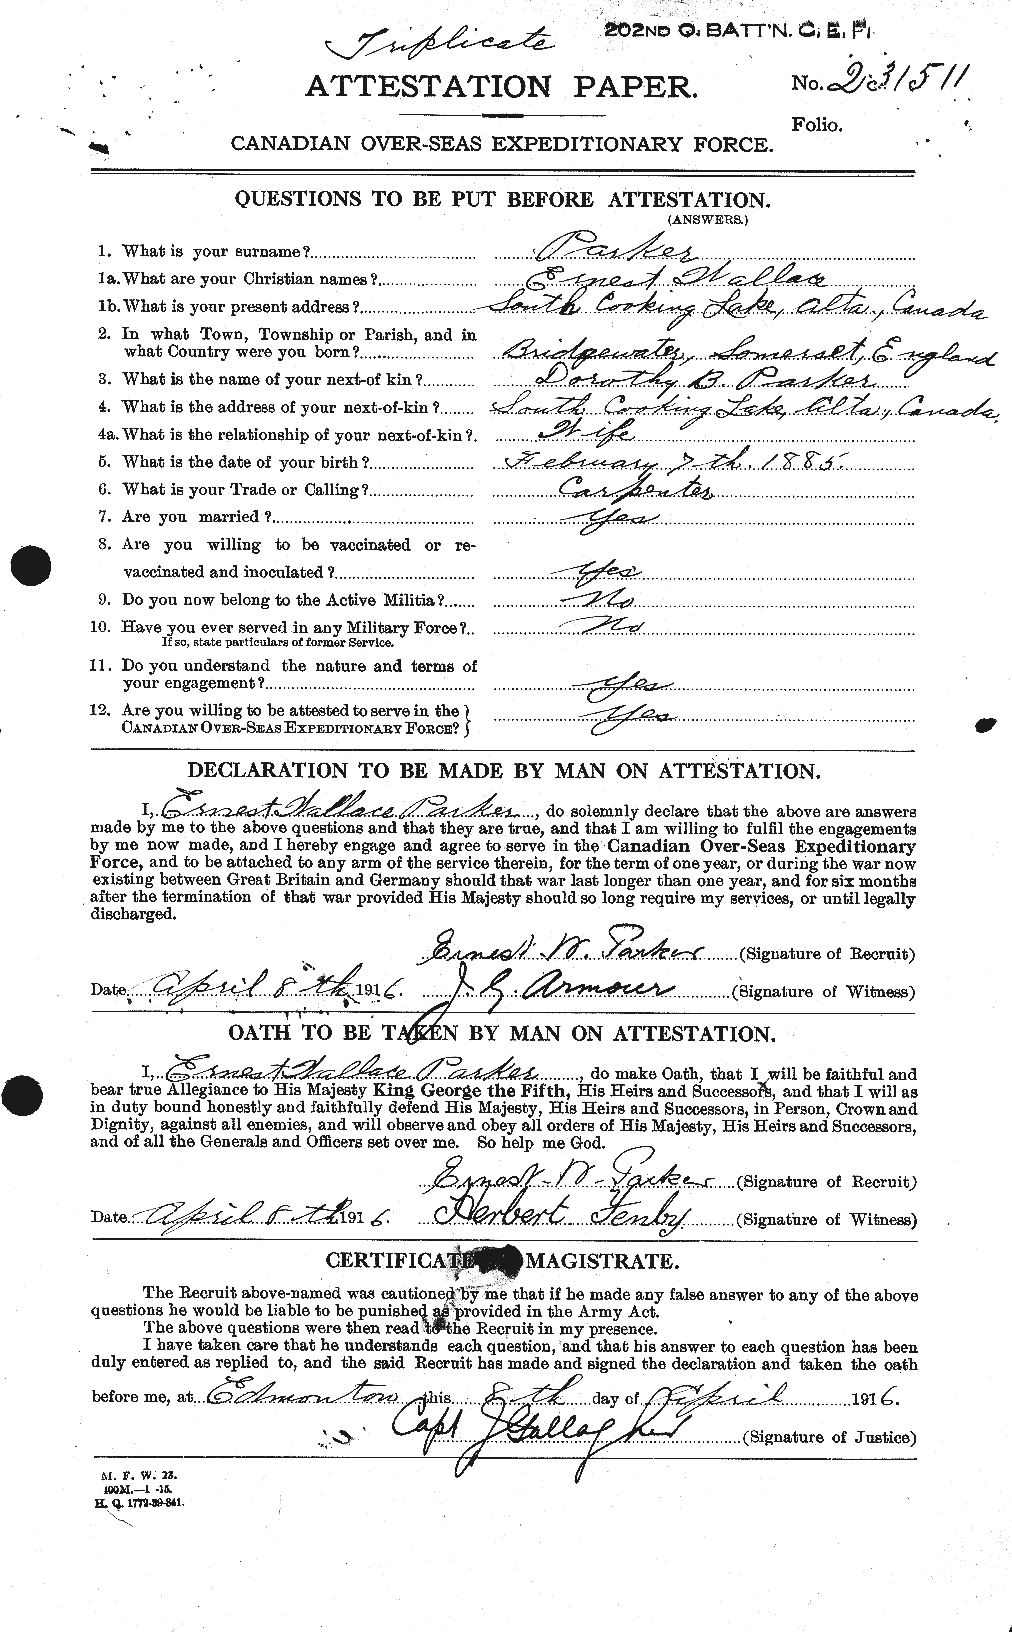 Personnel Records of the First World War - CEF 565168a